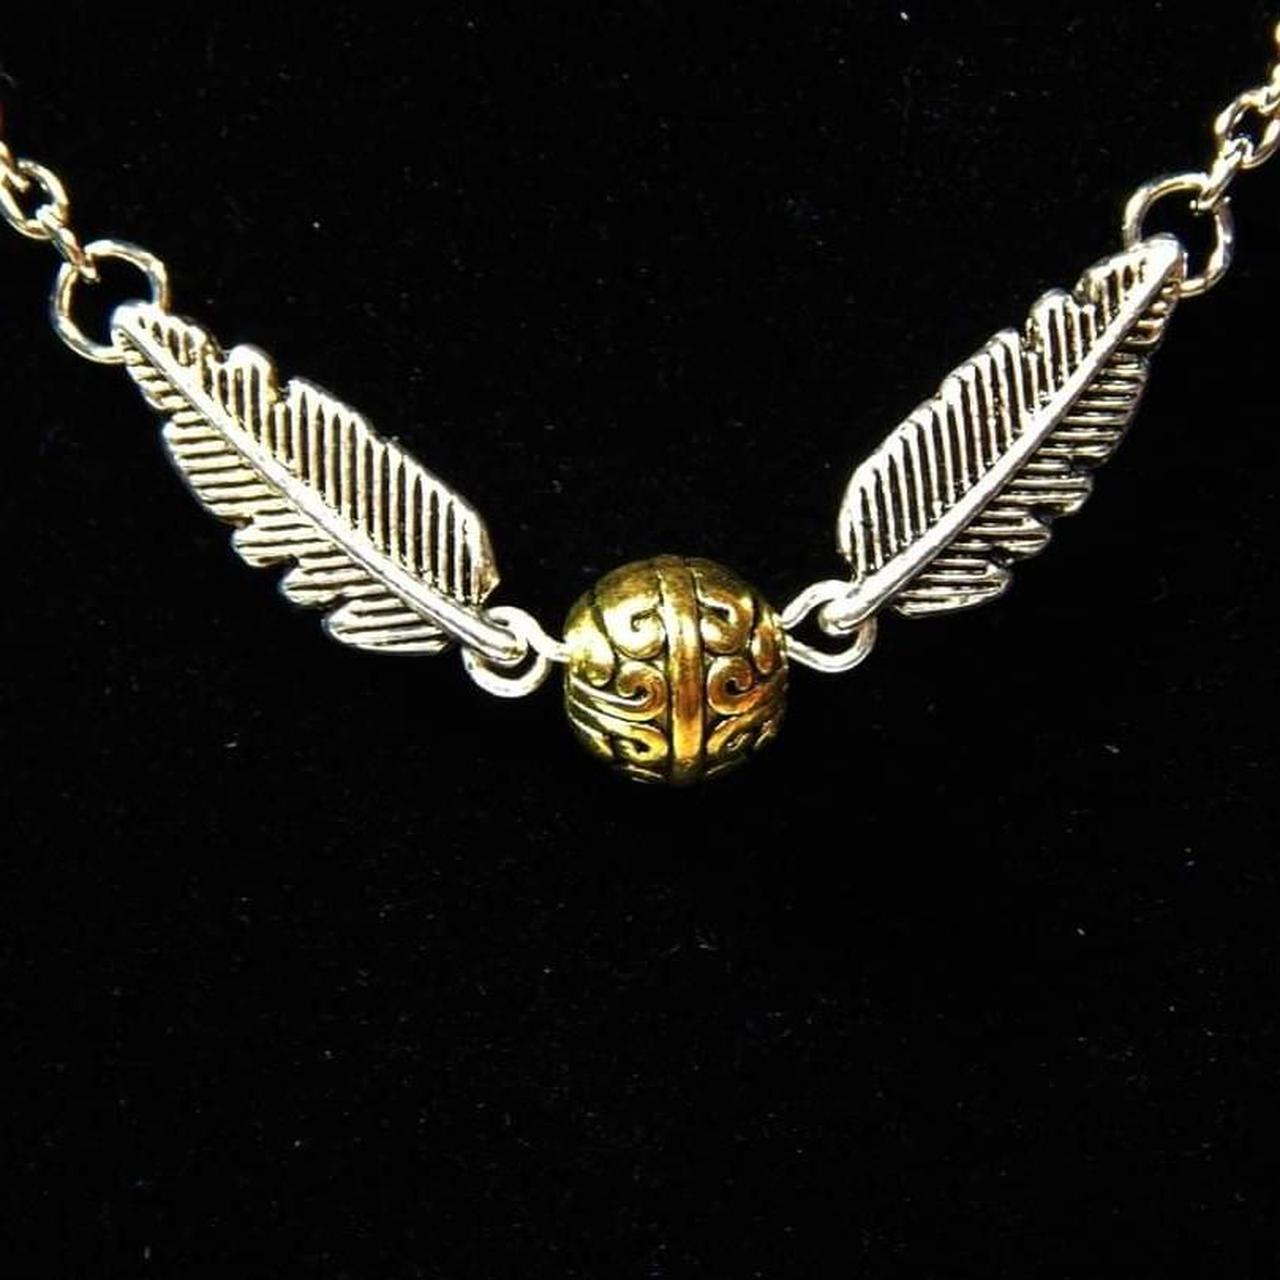 Golden Snitch Necklace